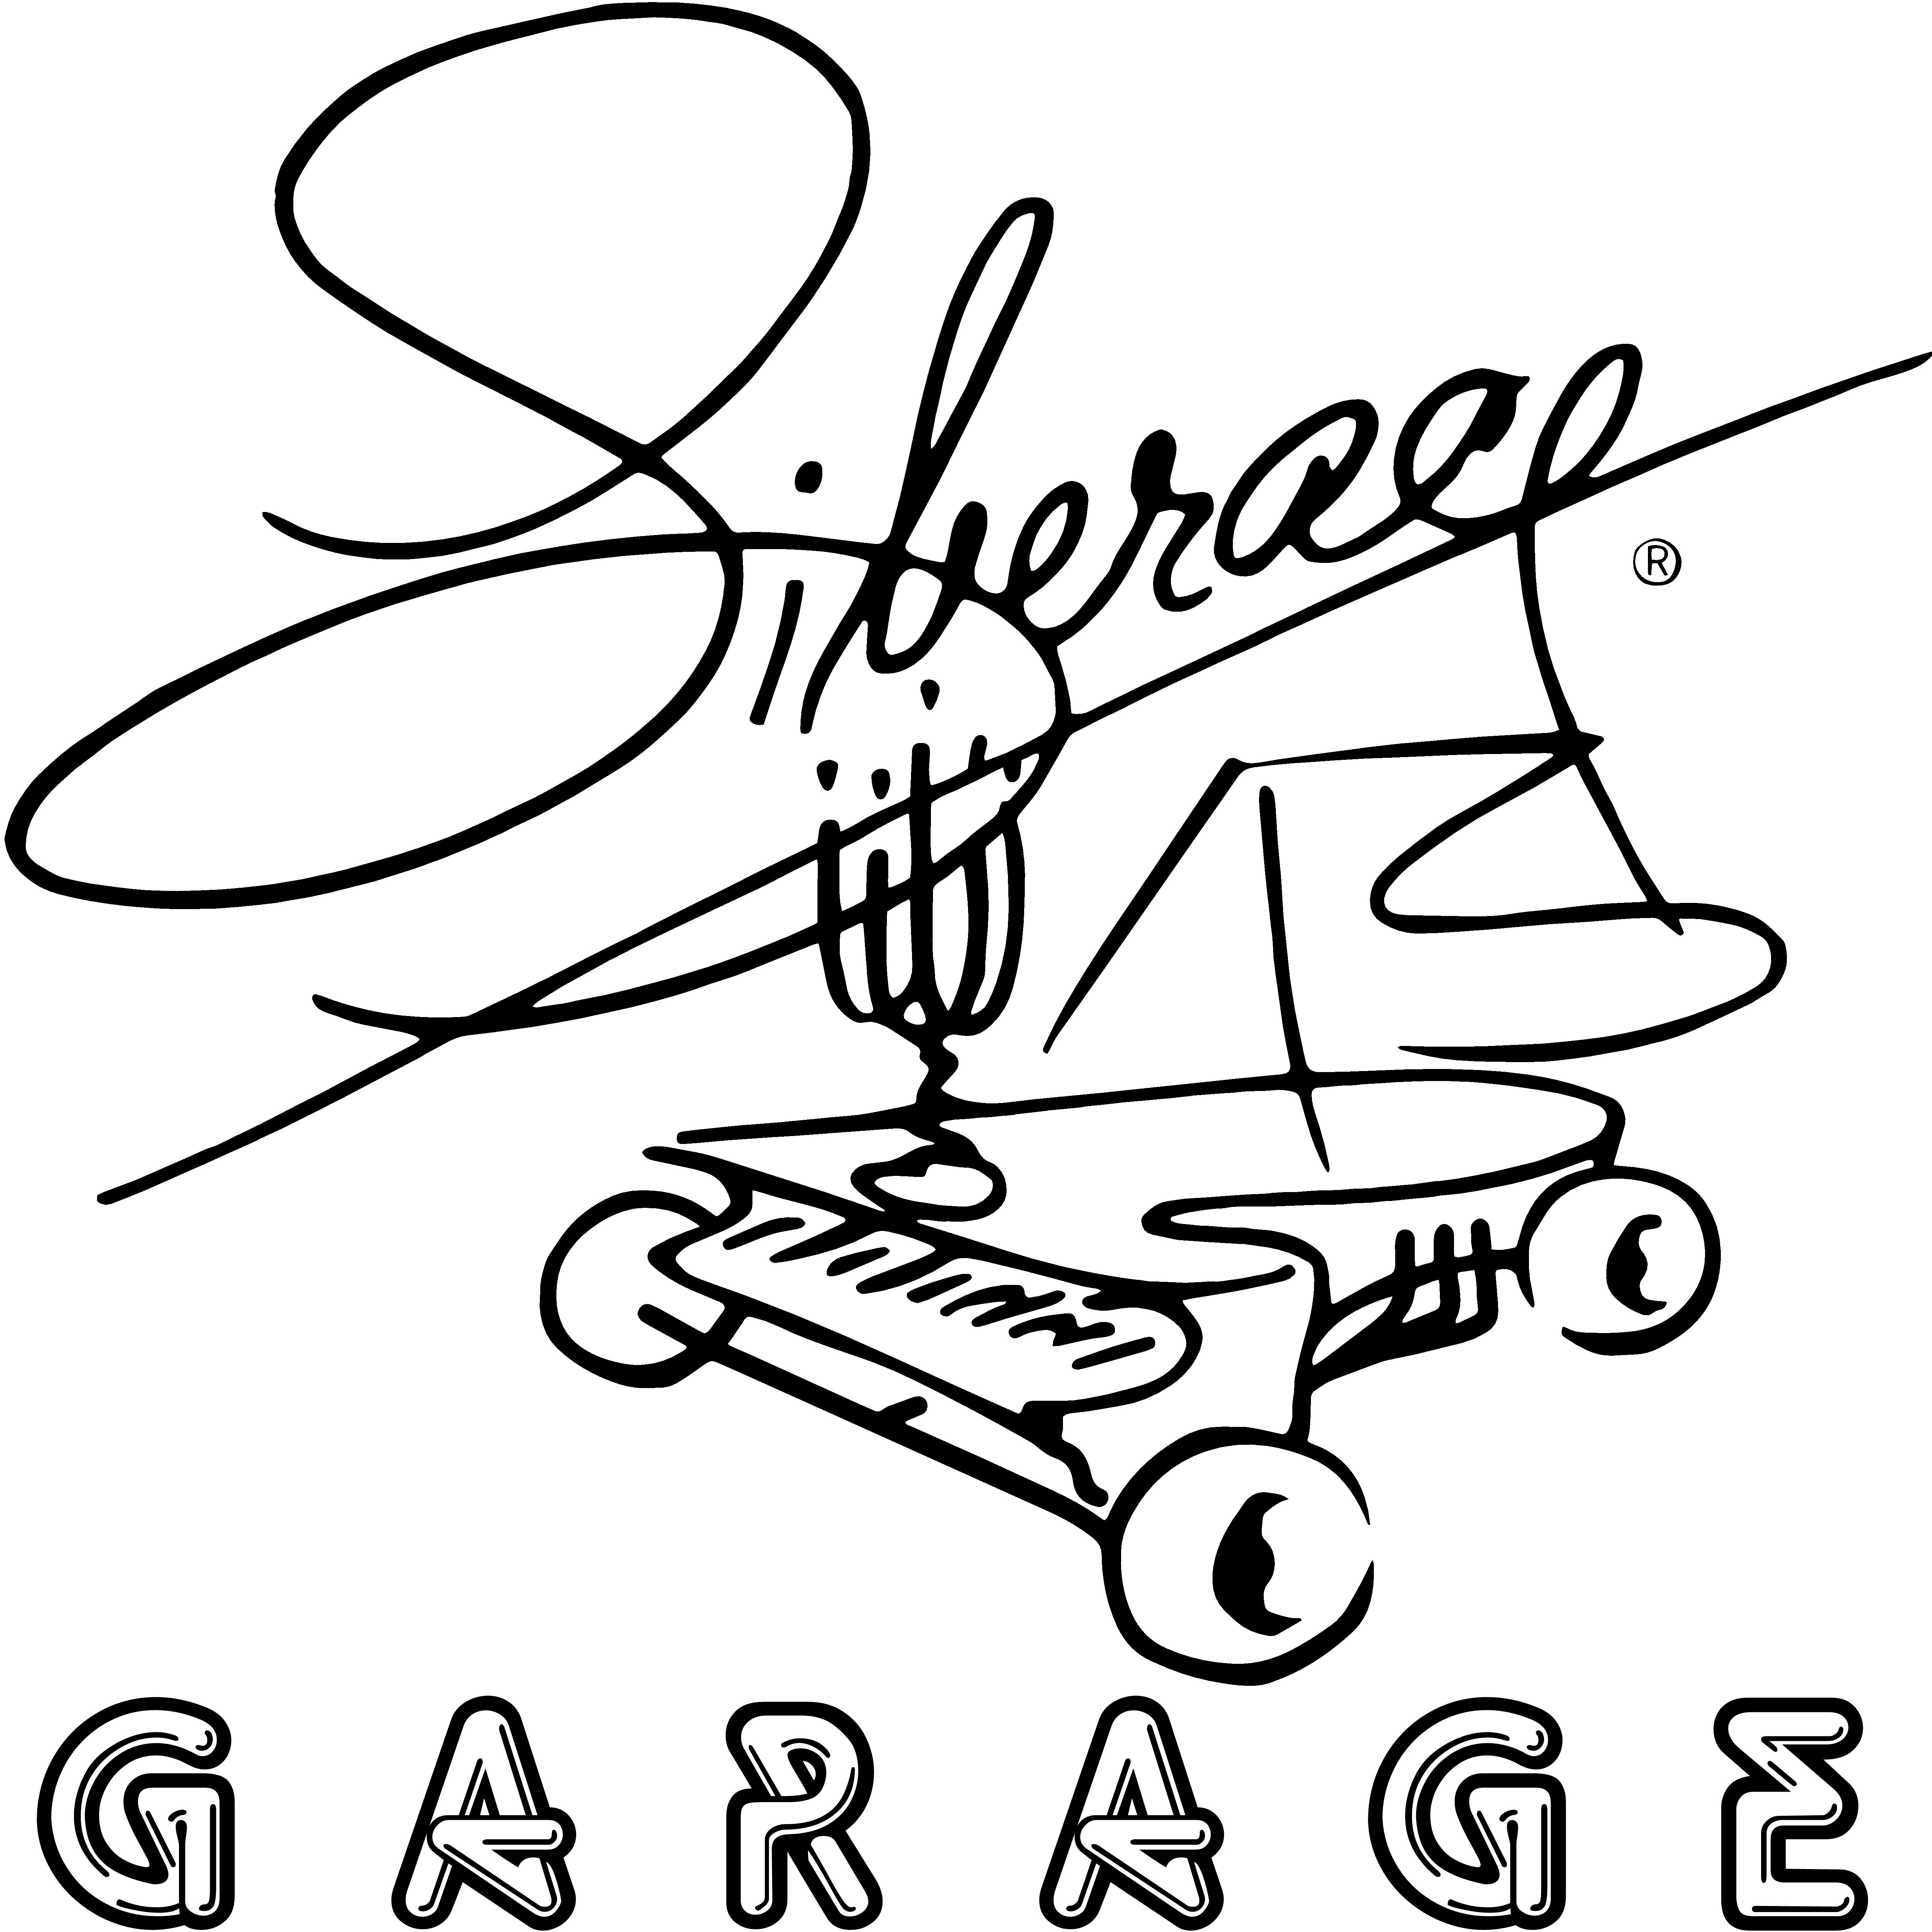 Liberace Garage_final_with name_AND-page-001